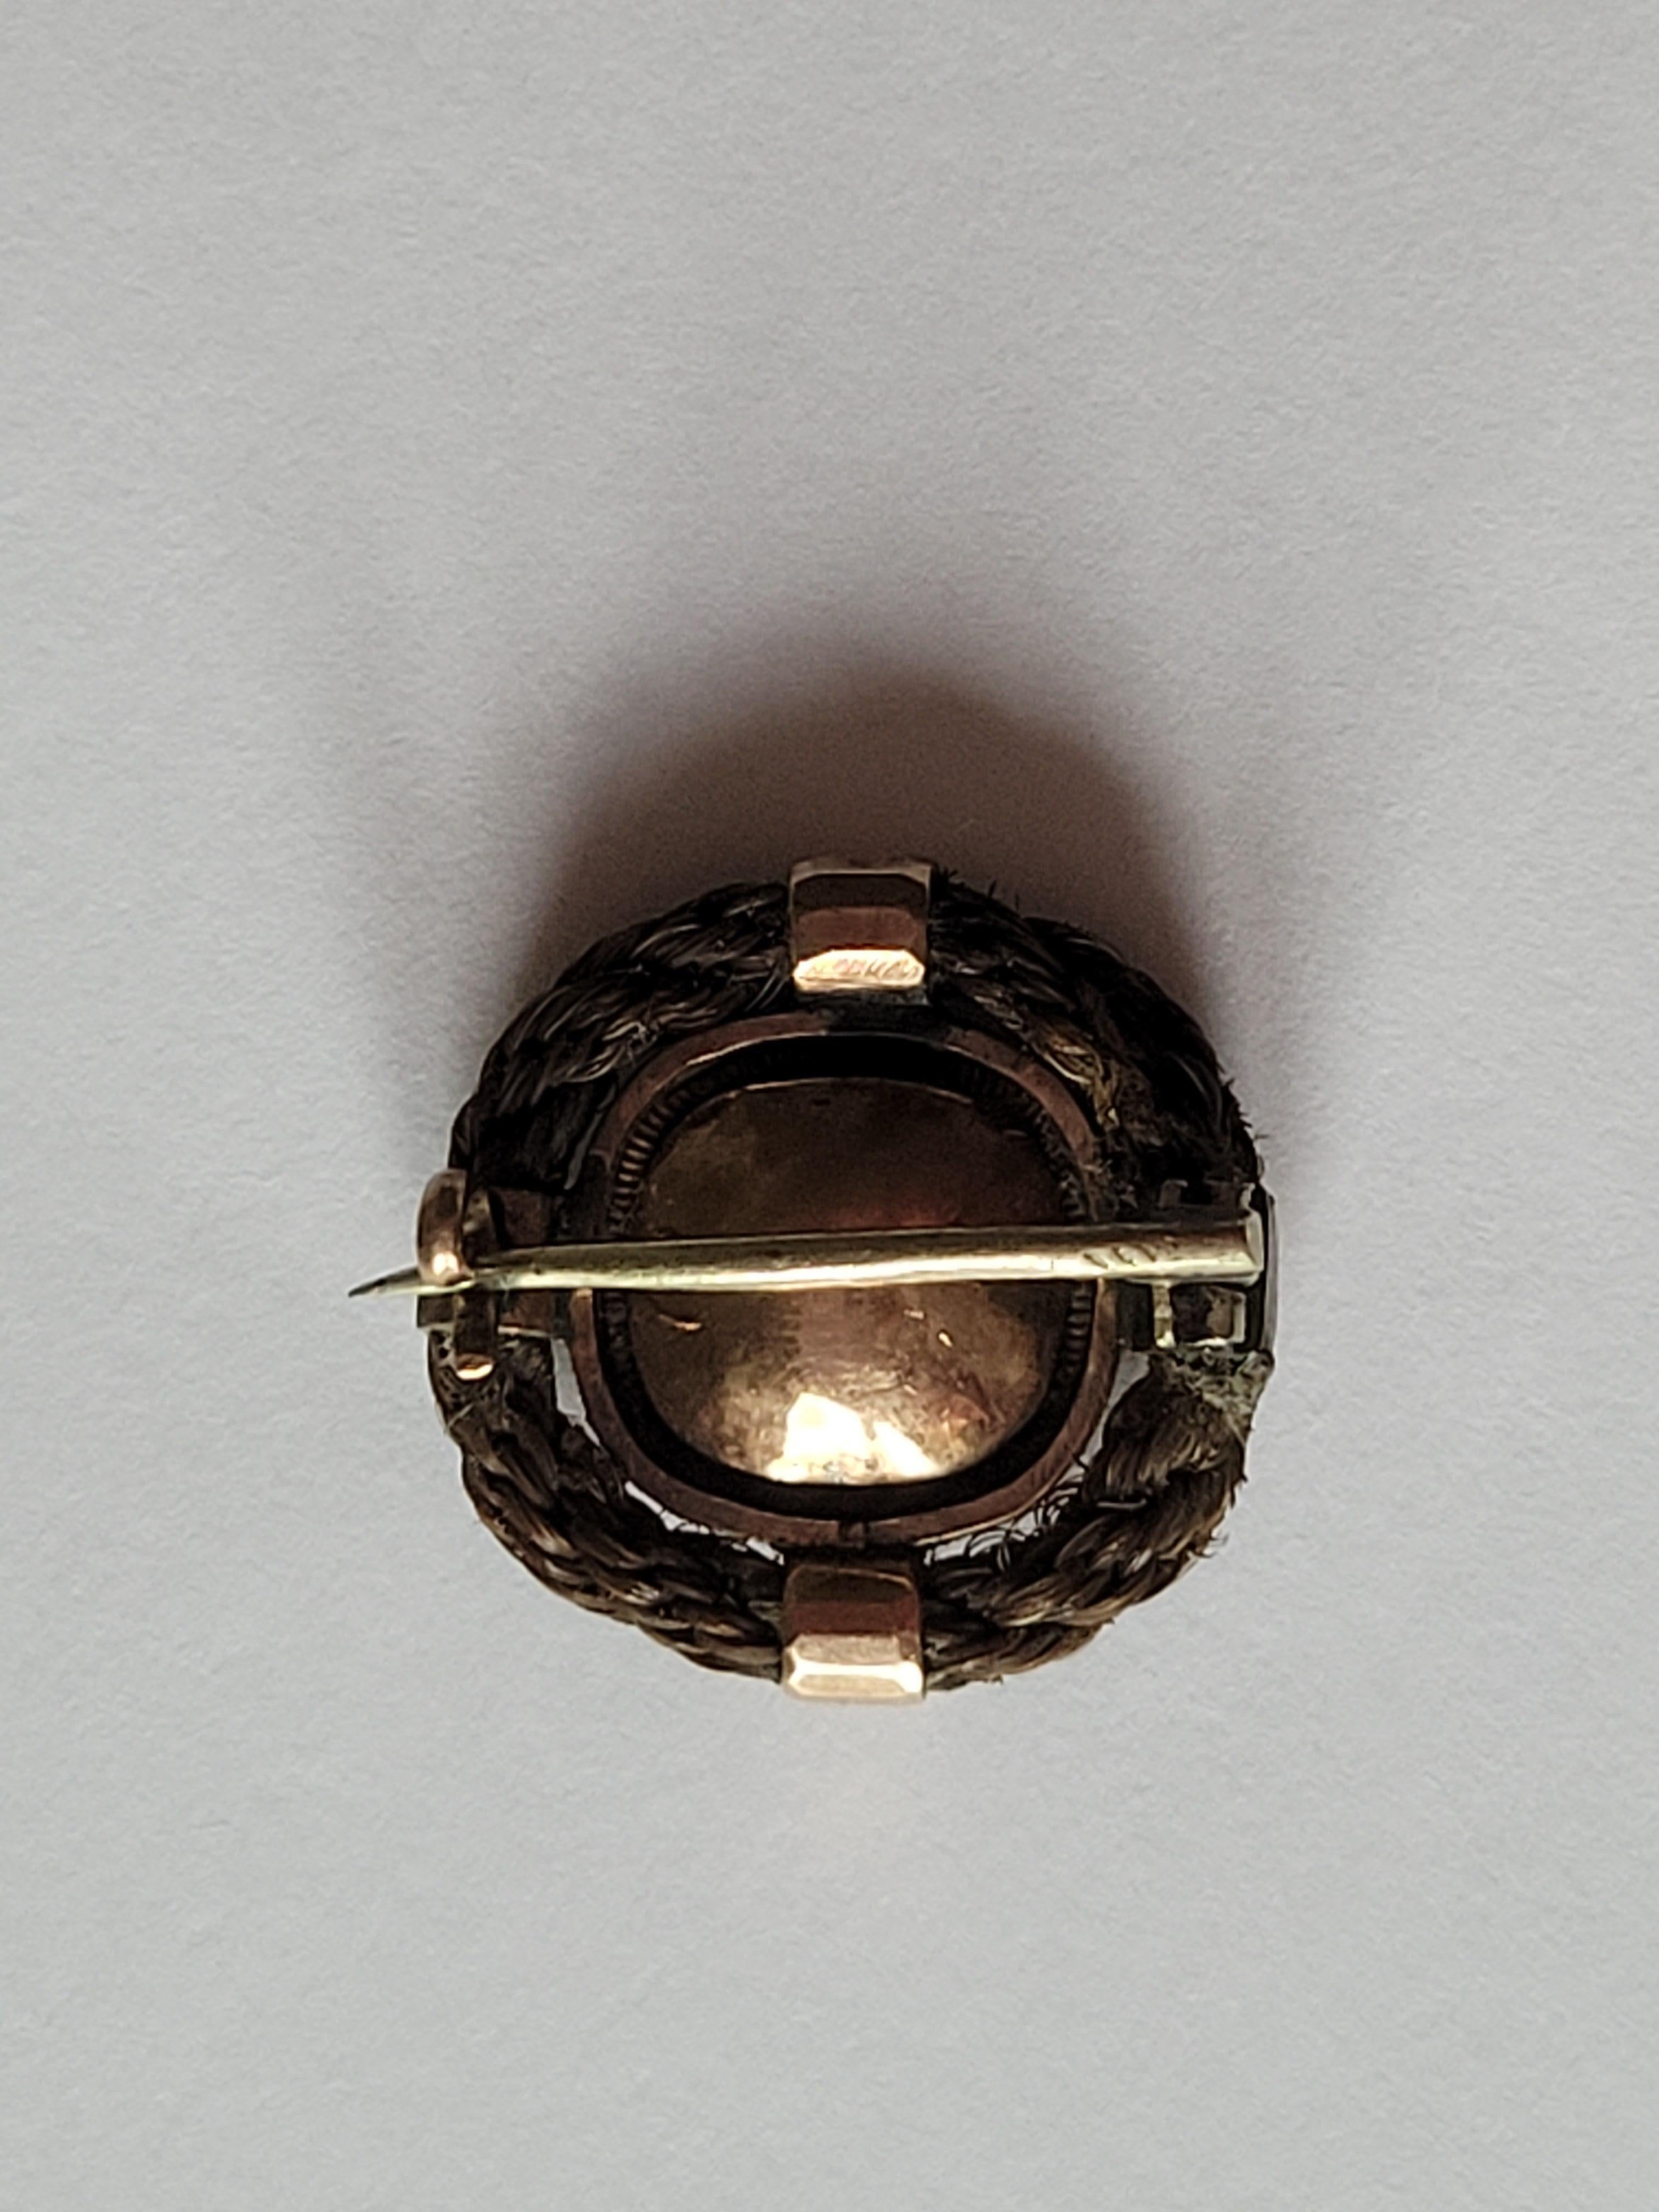 An Antique Victorian c.1840-1860s Mourning brooch. The stone in closed back rose gold setting surround by woven hair. Scottish origin.
Width 18mm.
Unmarked, tested 9 Carat Gold.
The brooch in very good condition for the age, a great collector's